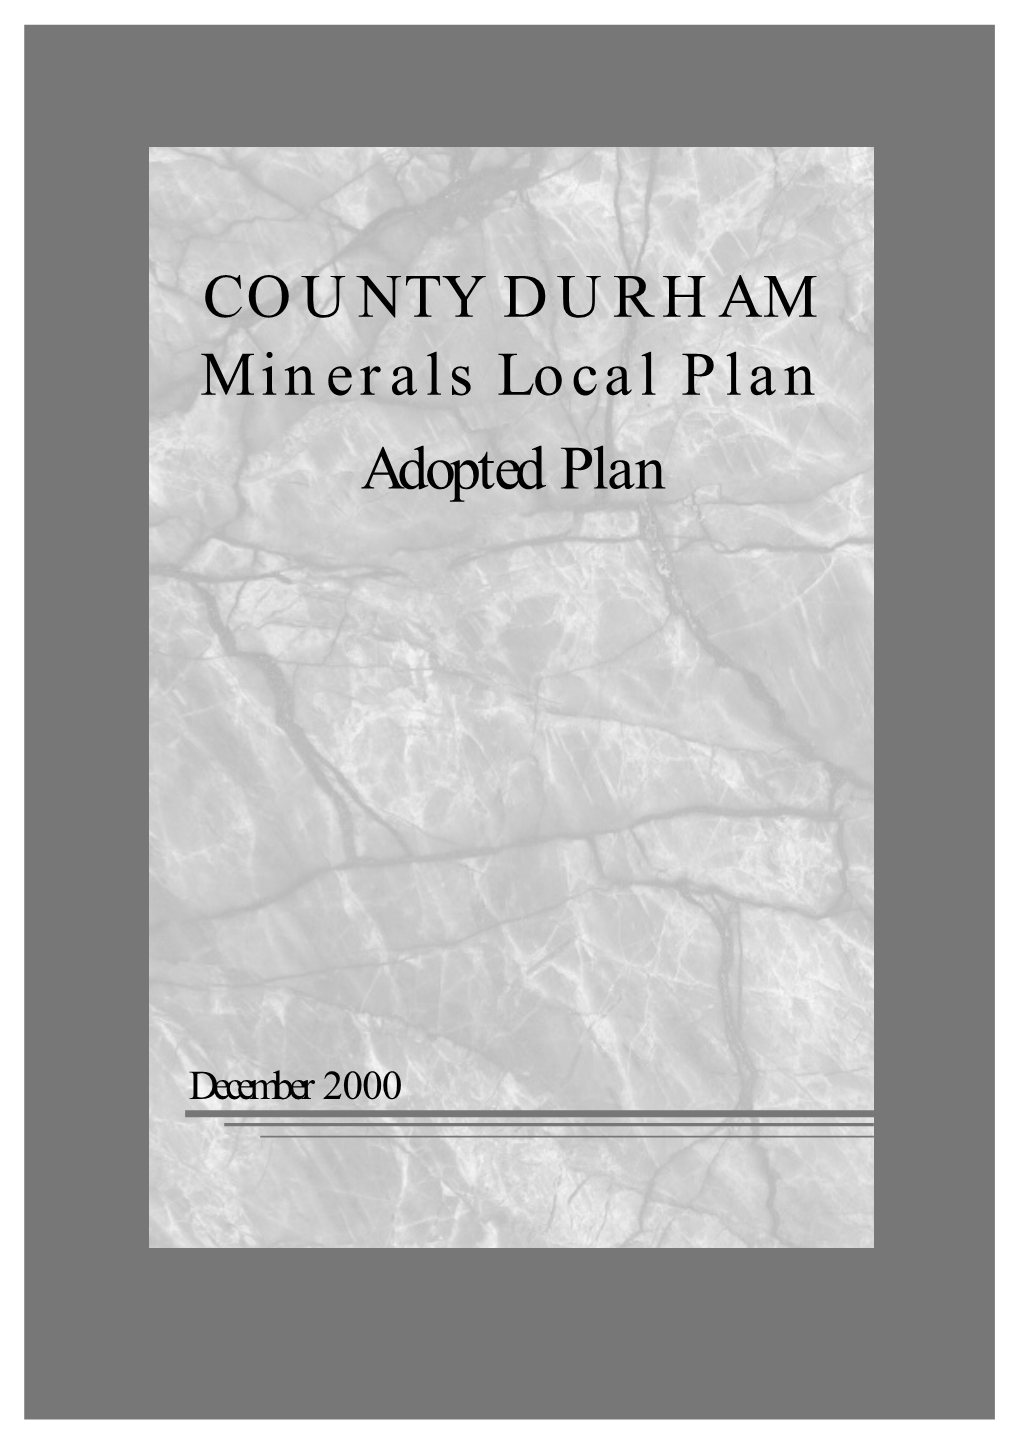 Minerals Local Plan Adopted Plan